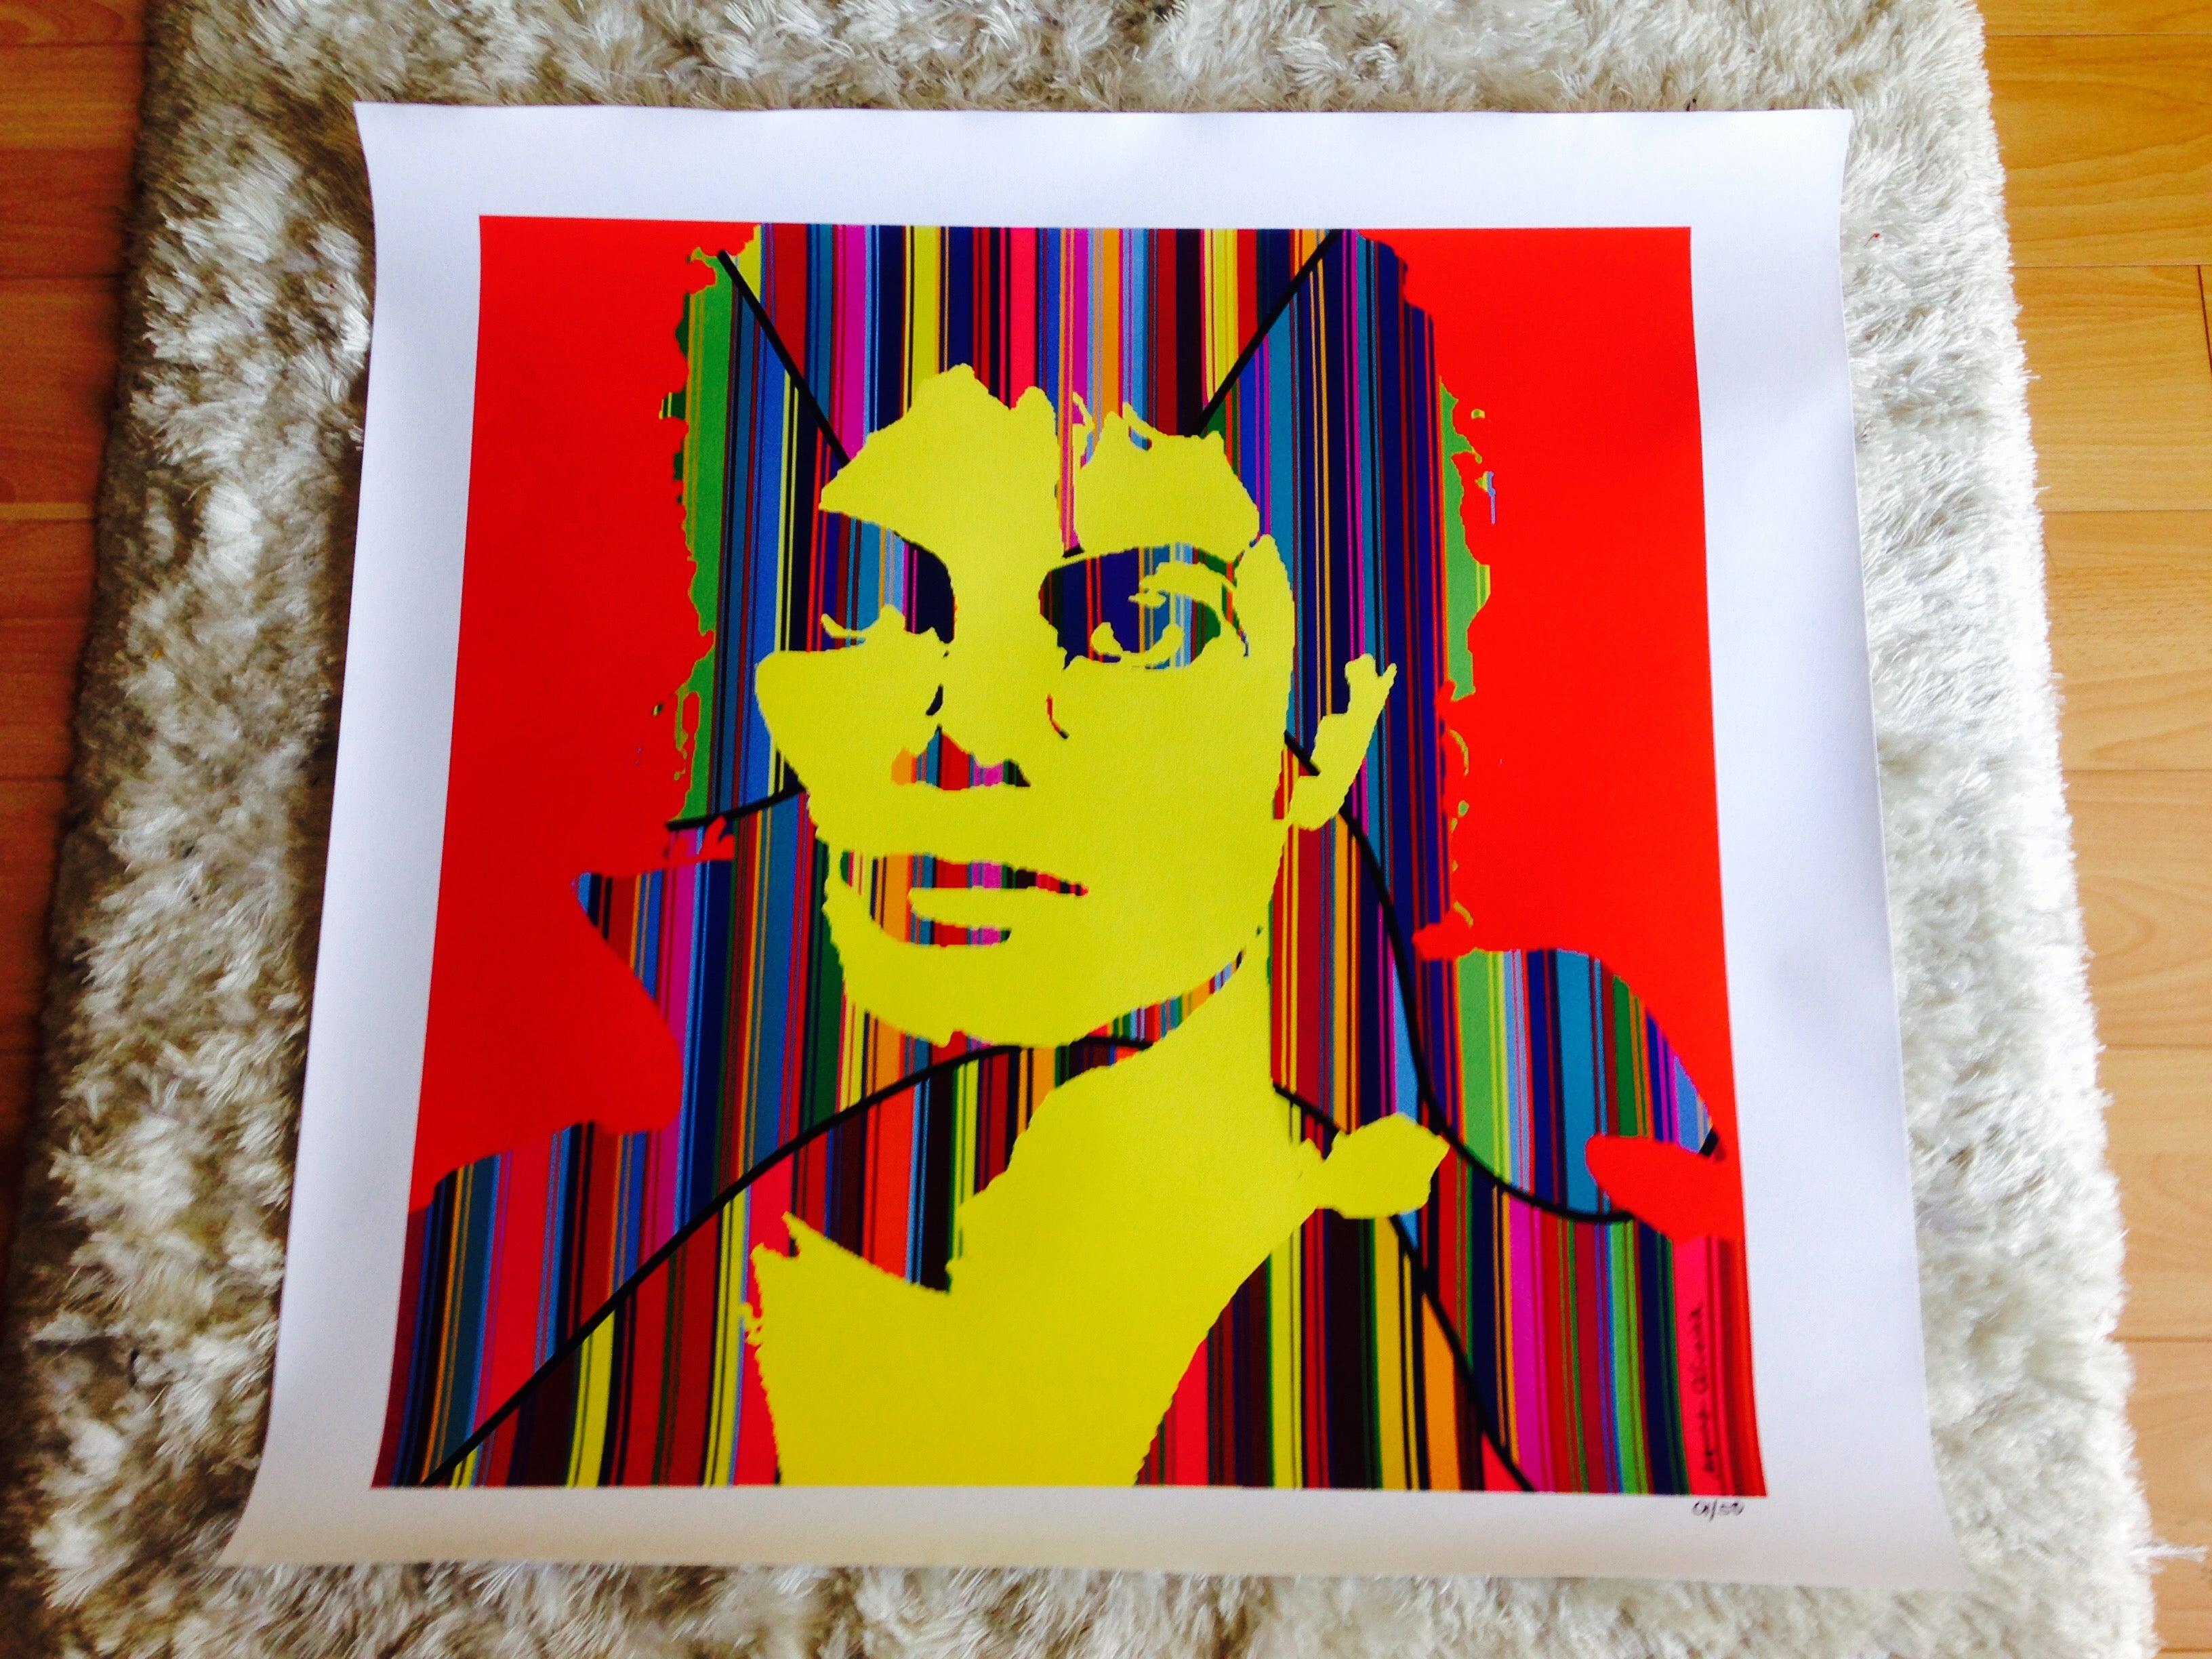 Celebrating the King of Pop Michael Jackson by Mauro Oliveira. The colorful pinstripes represent the music and the happiness the King of Pop brought to the world.

Limited edition of 30 museum quality Giclee prints on CANVAS, signed and numbered by